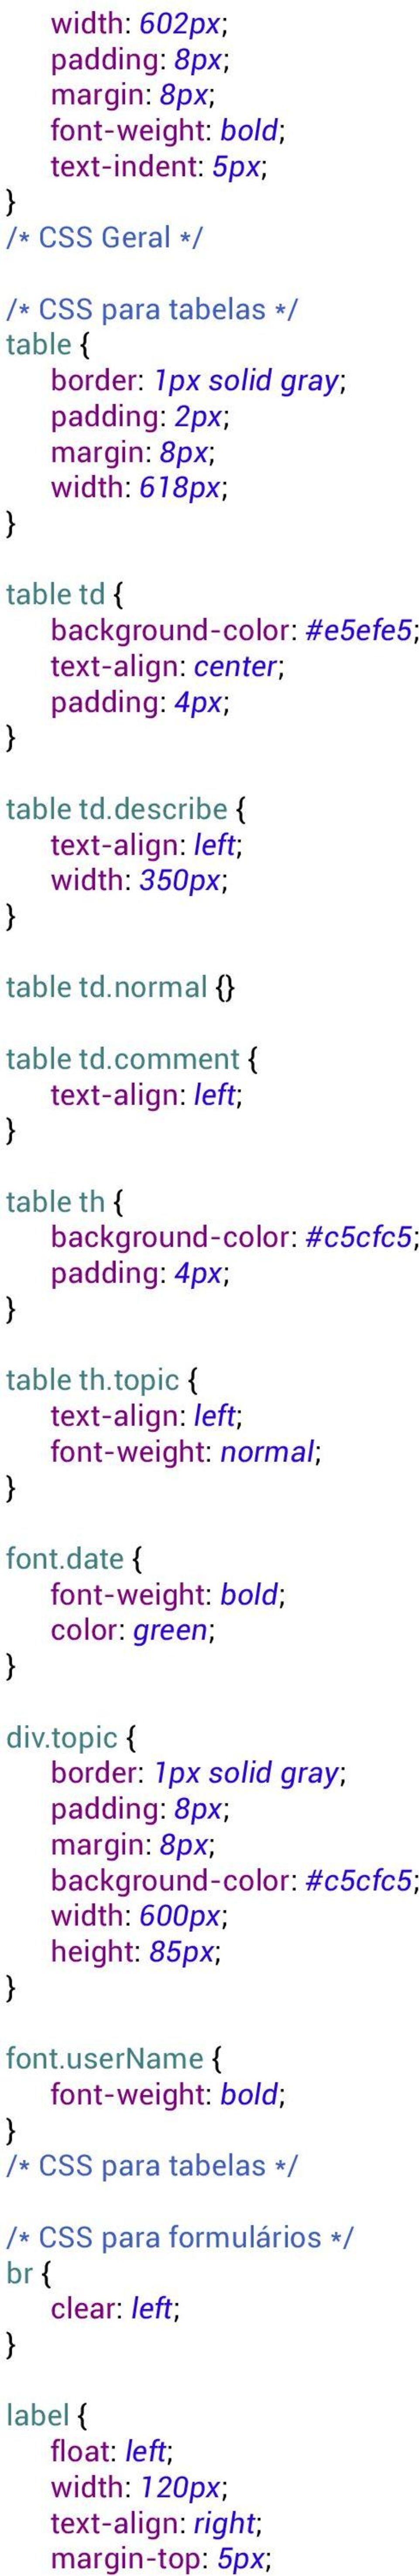 comment { text-align: left; table th { background-color: #c5cfc5; padding: 4px; table th.topic { text-align: left; font-weight: normal; font.date { font-weight: bold; color: green; div.